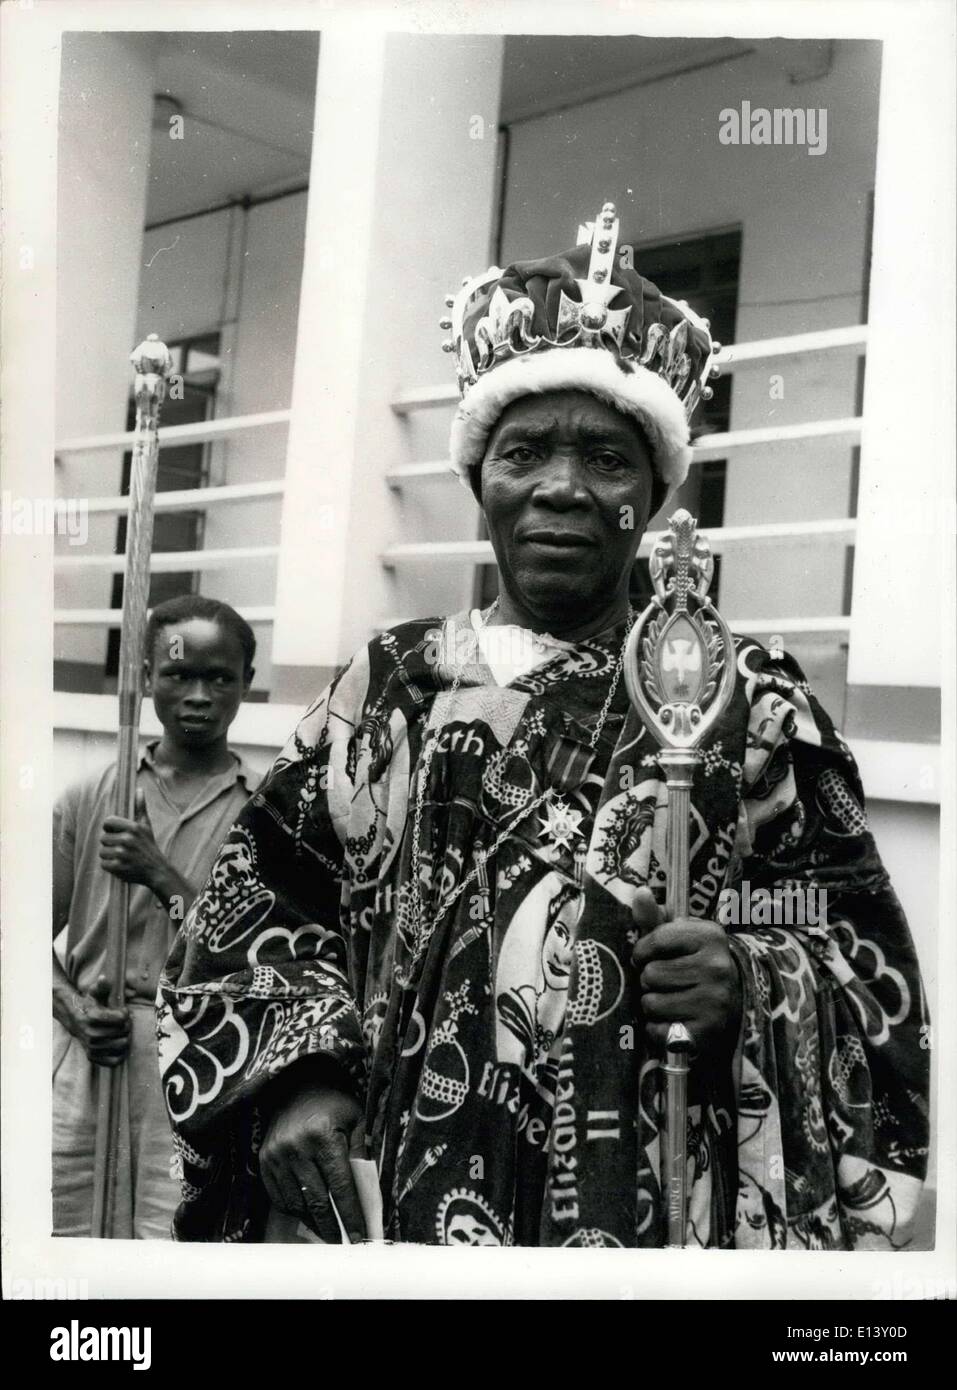 Mar. 31, 2012 - ....And Obi Oksi II Dressed His Best For The Duke: The Gloucester's Nigerian Tour did not go unmarked in the special diary of Obi Oksi II, Natural Ruler of Onitsha, When the Duke and Duchess were recently visiting Enugu in the Eastern Region. For the ceremony in the Assembly House his majesty wore his ermine-lined crown, carried his staff and symbols and wore his gold signet ring, not forgetting to pin a treasured Imperial Honour graciously presented him by Her Majesty Queen Elizabeth II of Great Britain and the Commonwealth Stock Photo